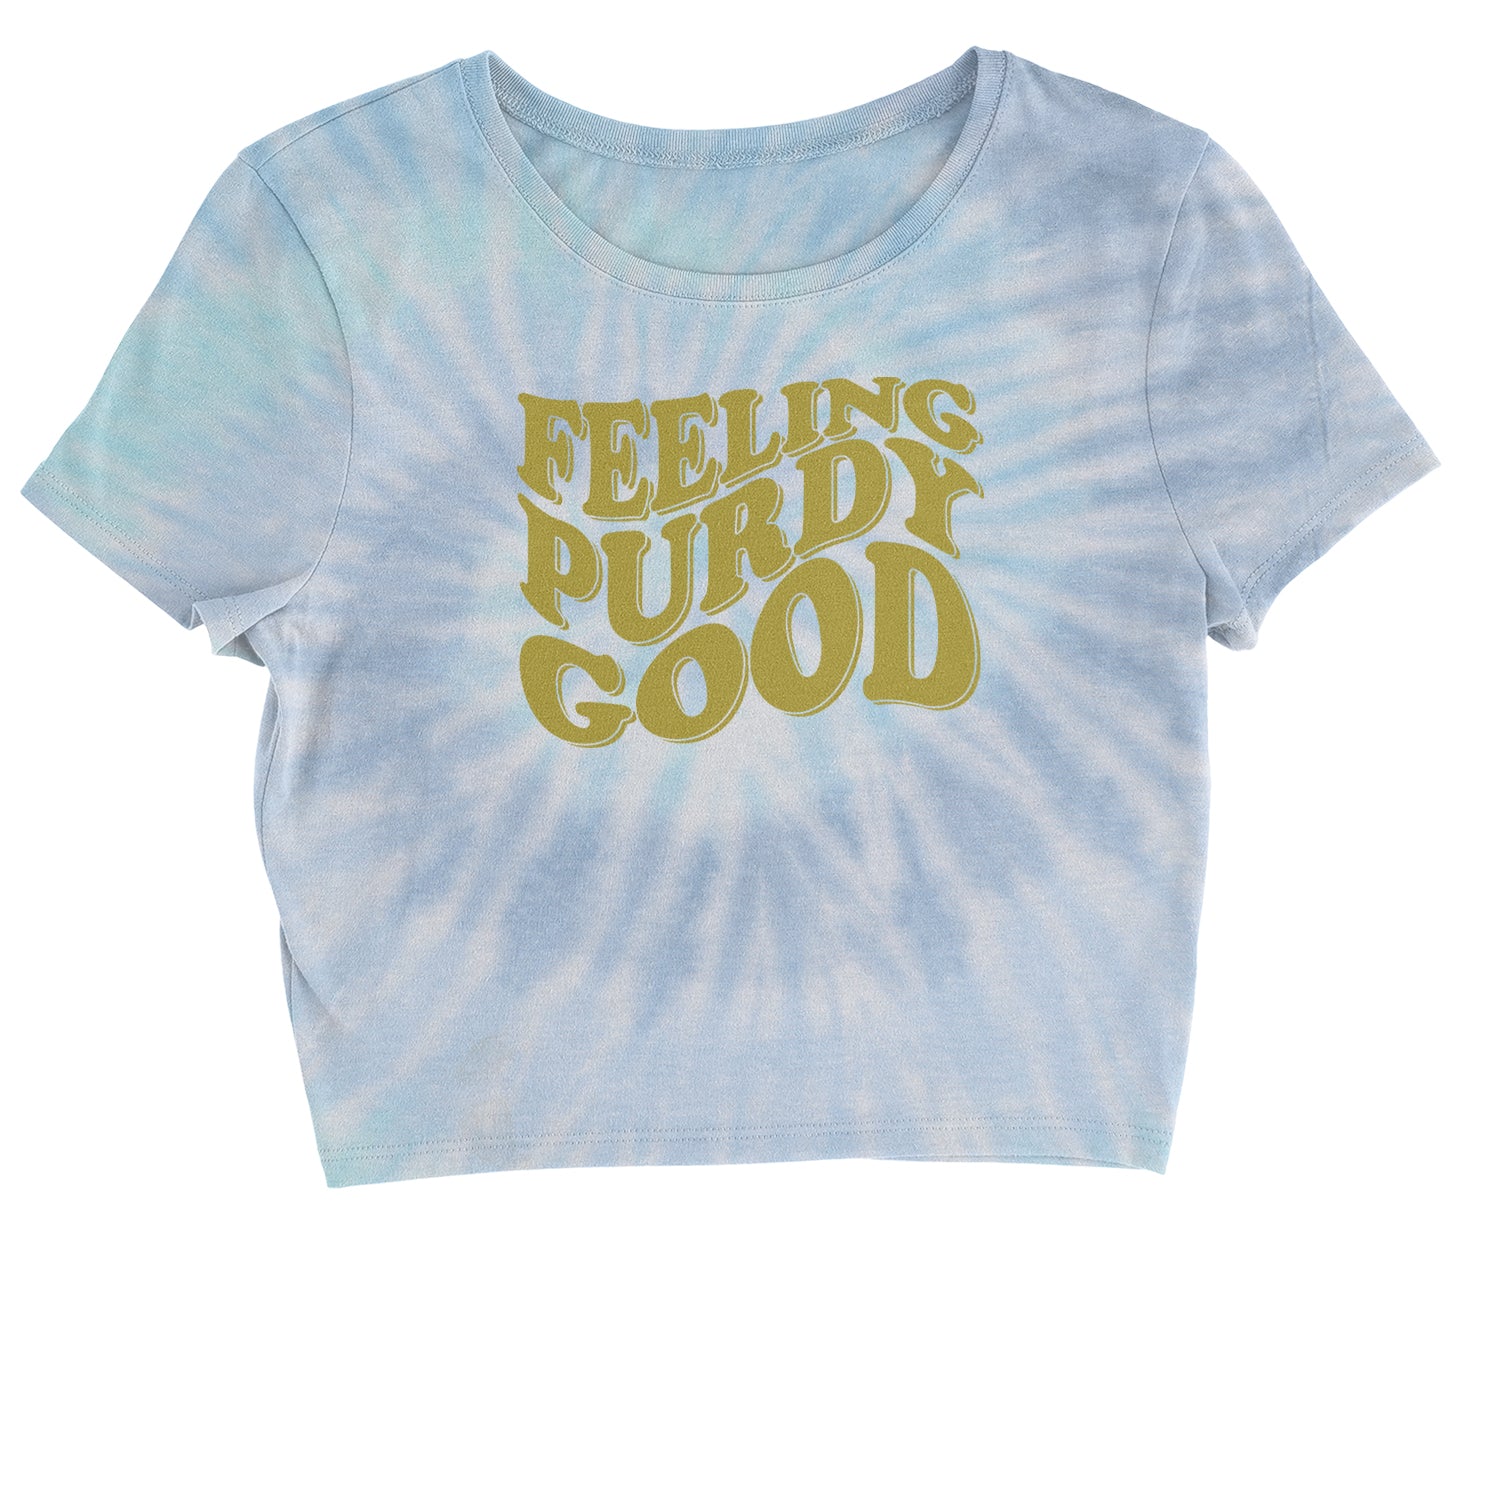 Feeling Purdy Good Cropped T-Shirt 13, football by Expression Tees